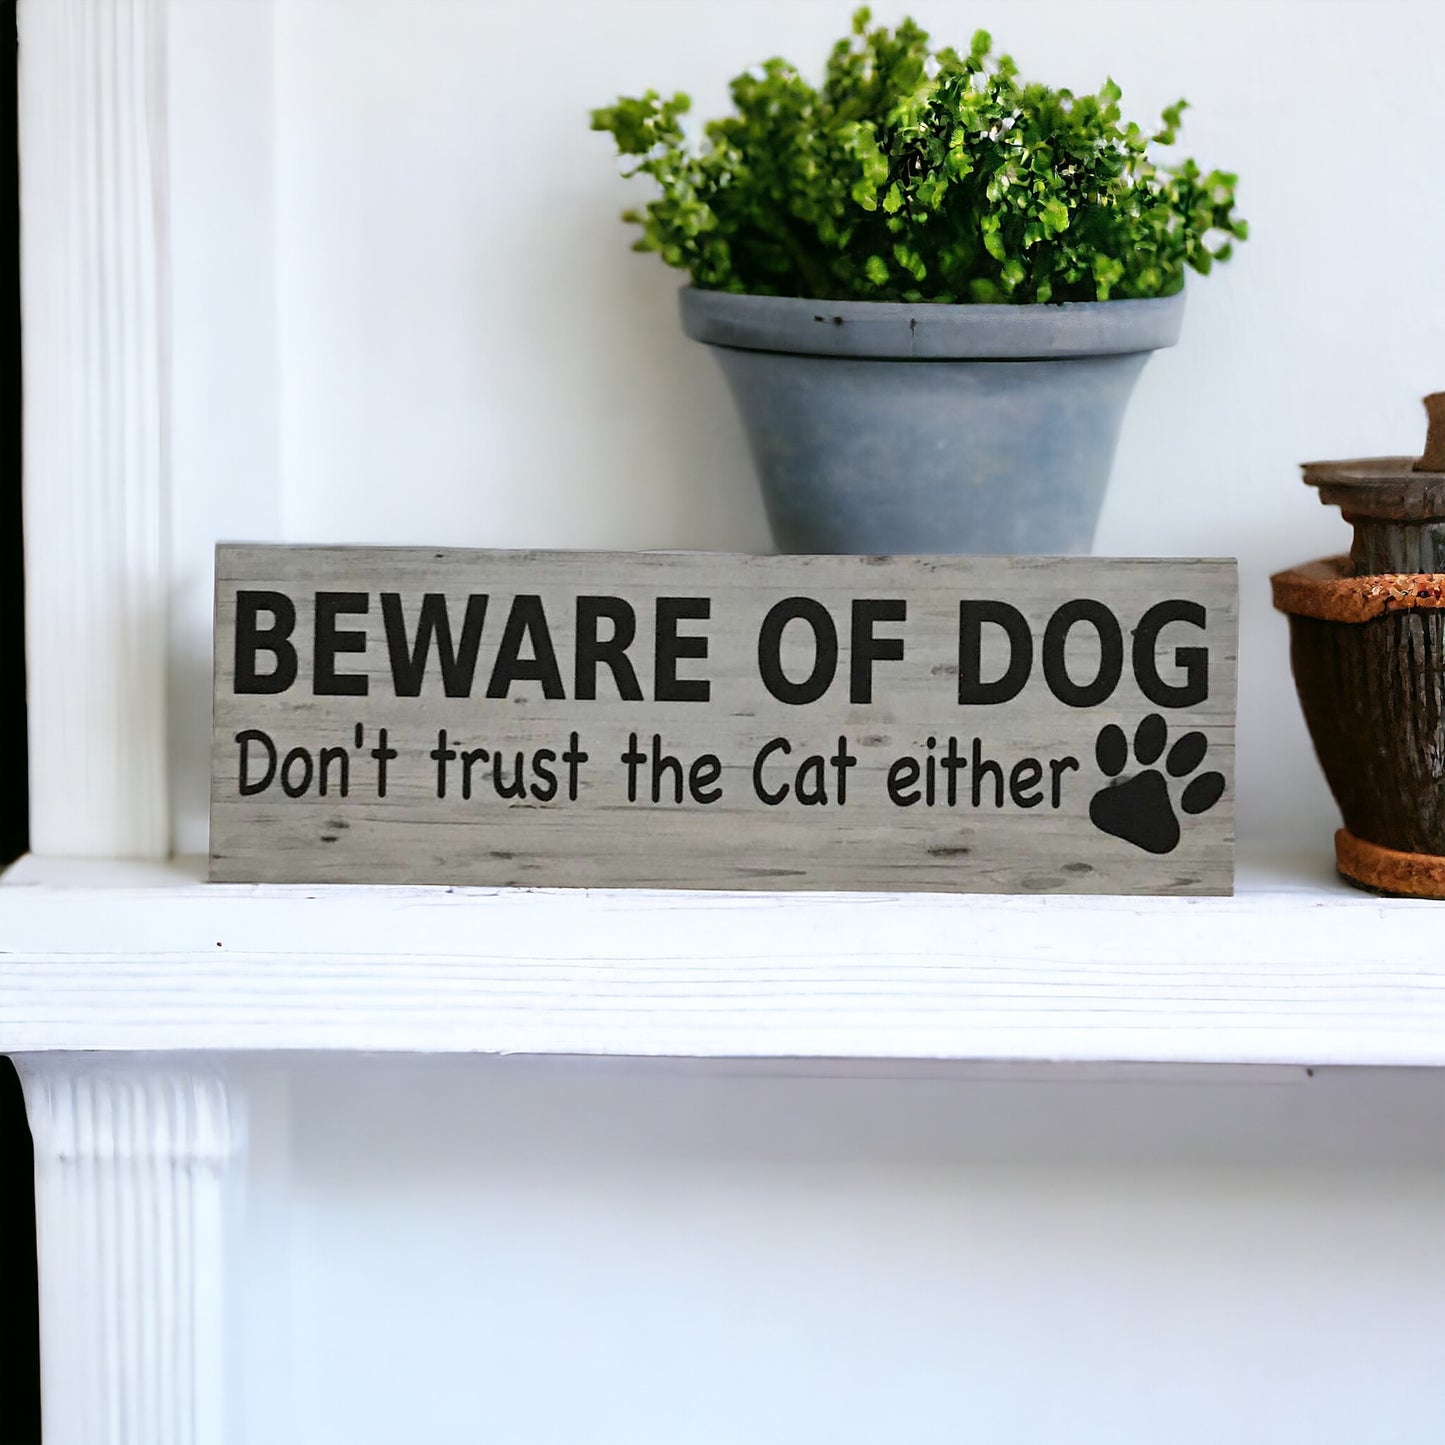 Beware Of Dog Dogs Don't Trust The Cats Cat Either Sign - The Renmy Store Homewares & Gifts 